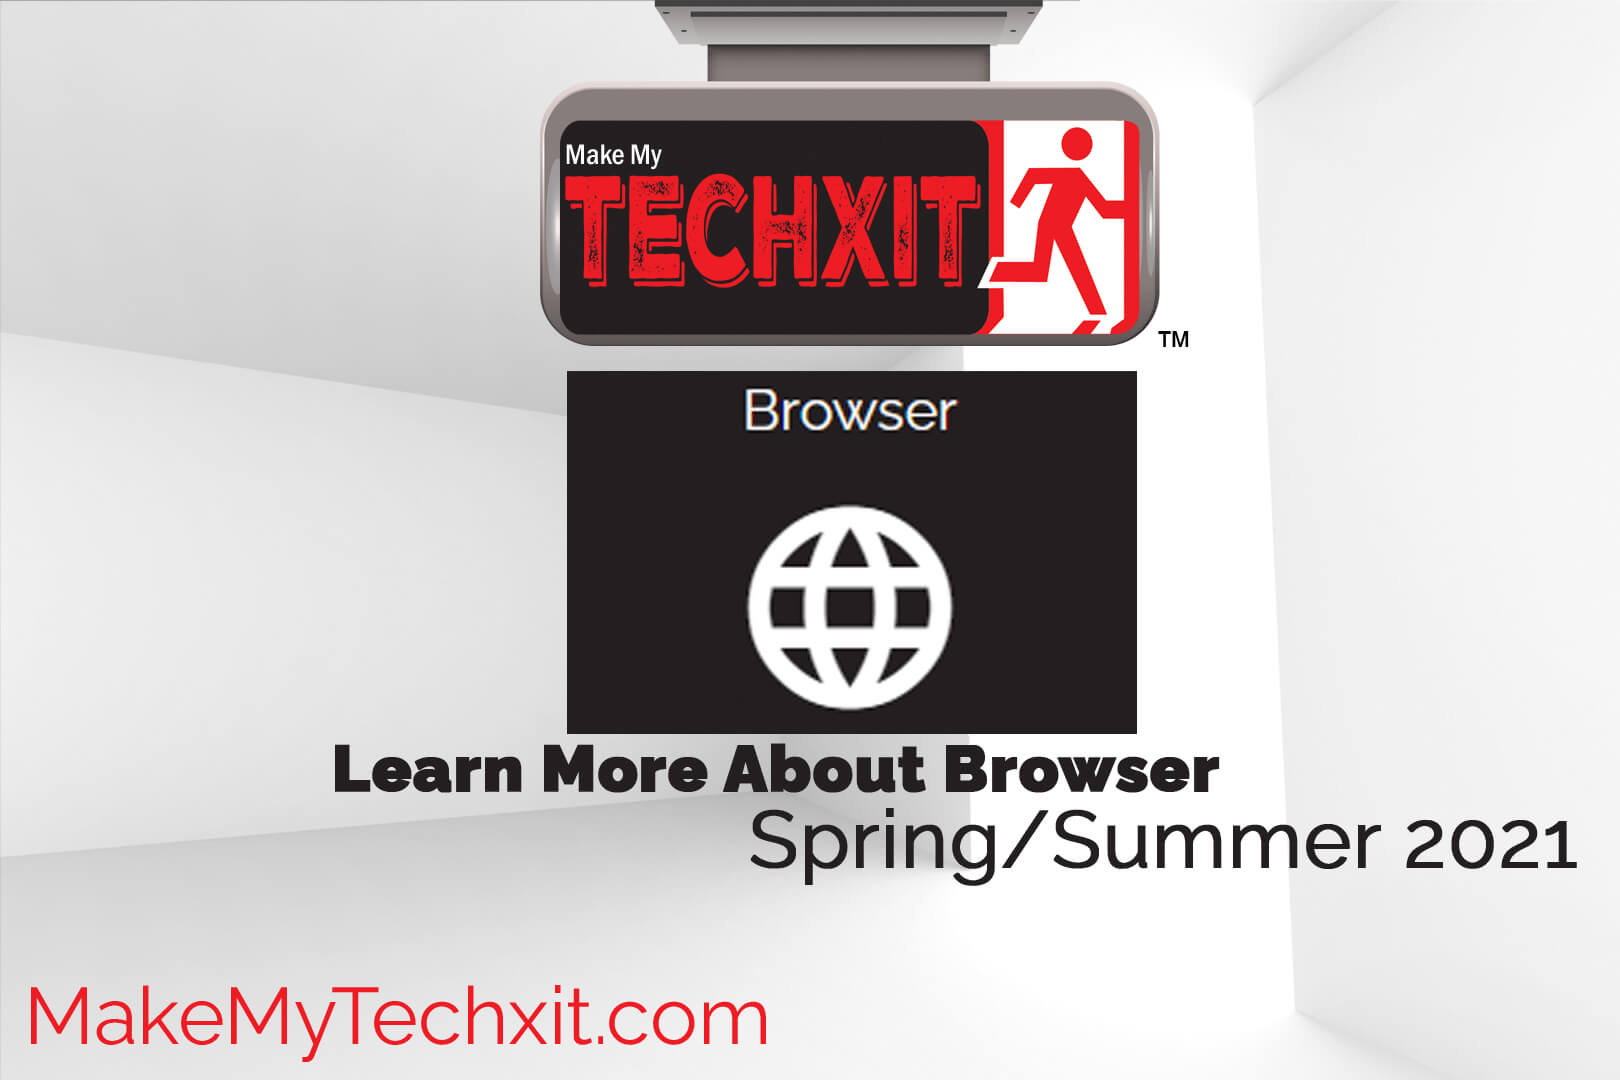 https://www.makemytechxit.com/learn-more-about-browser.php